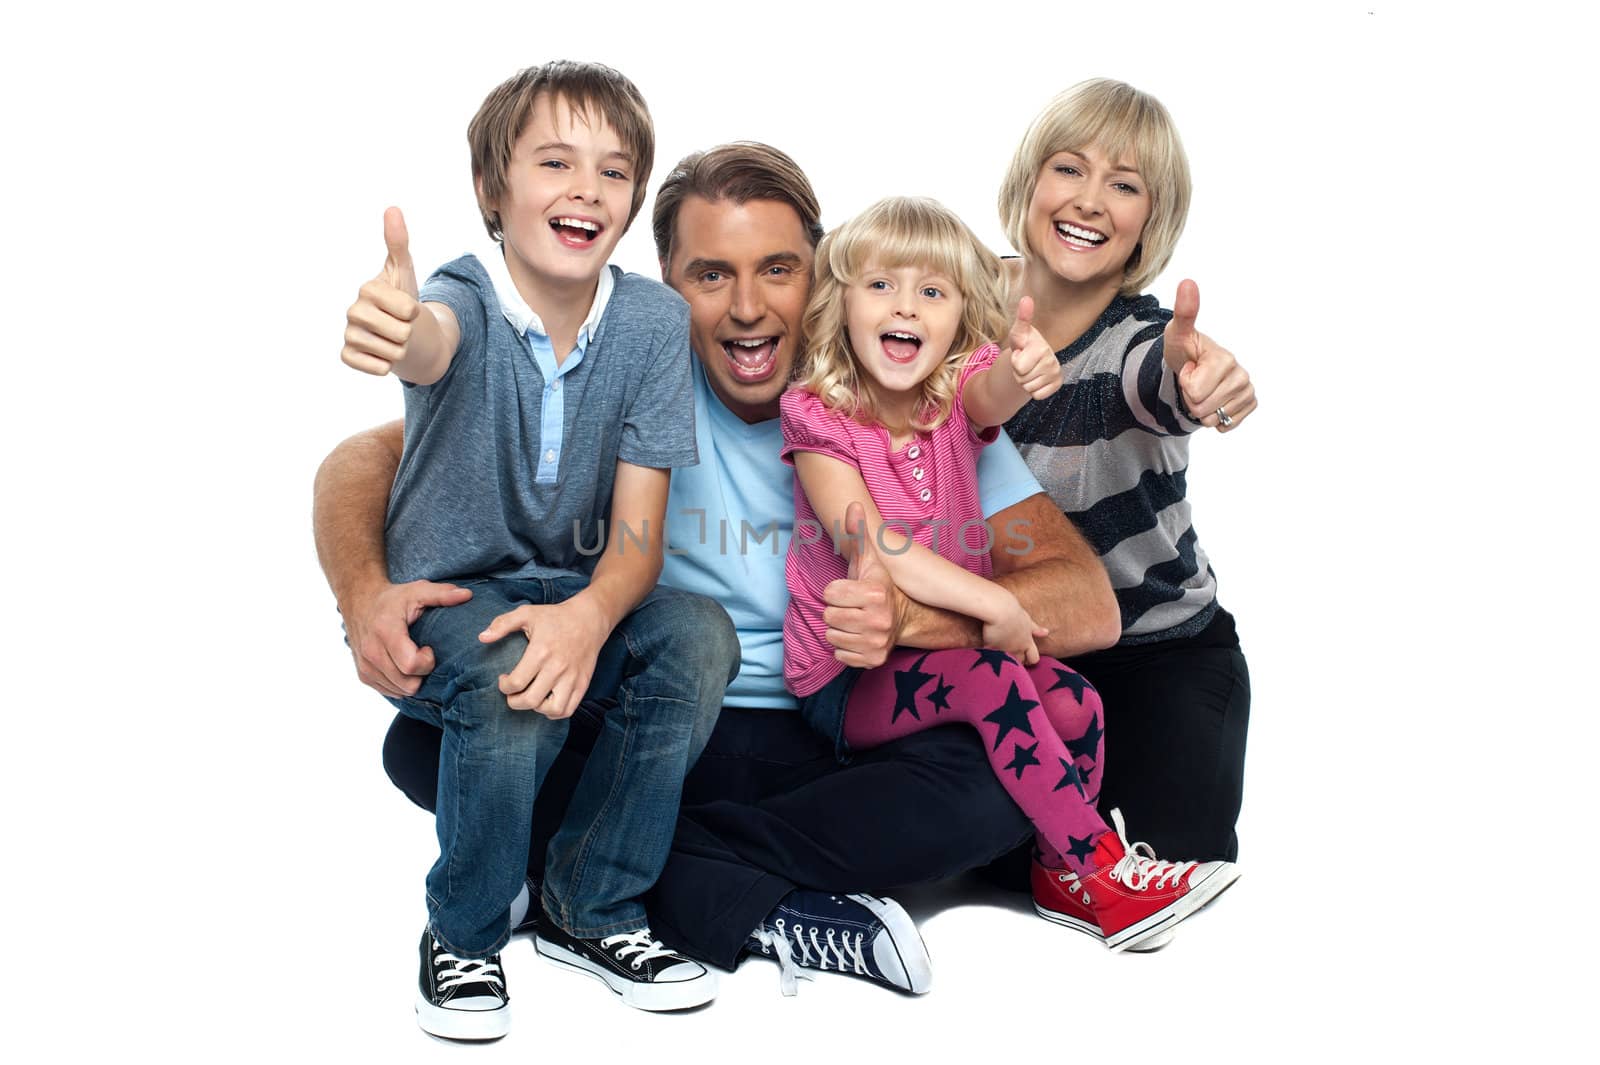 Cheerful thumbs up family by stockyimages